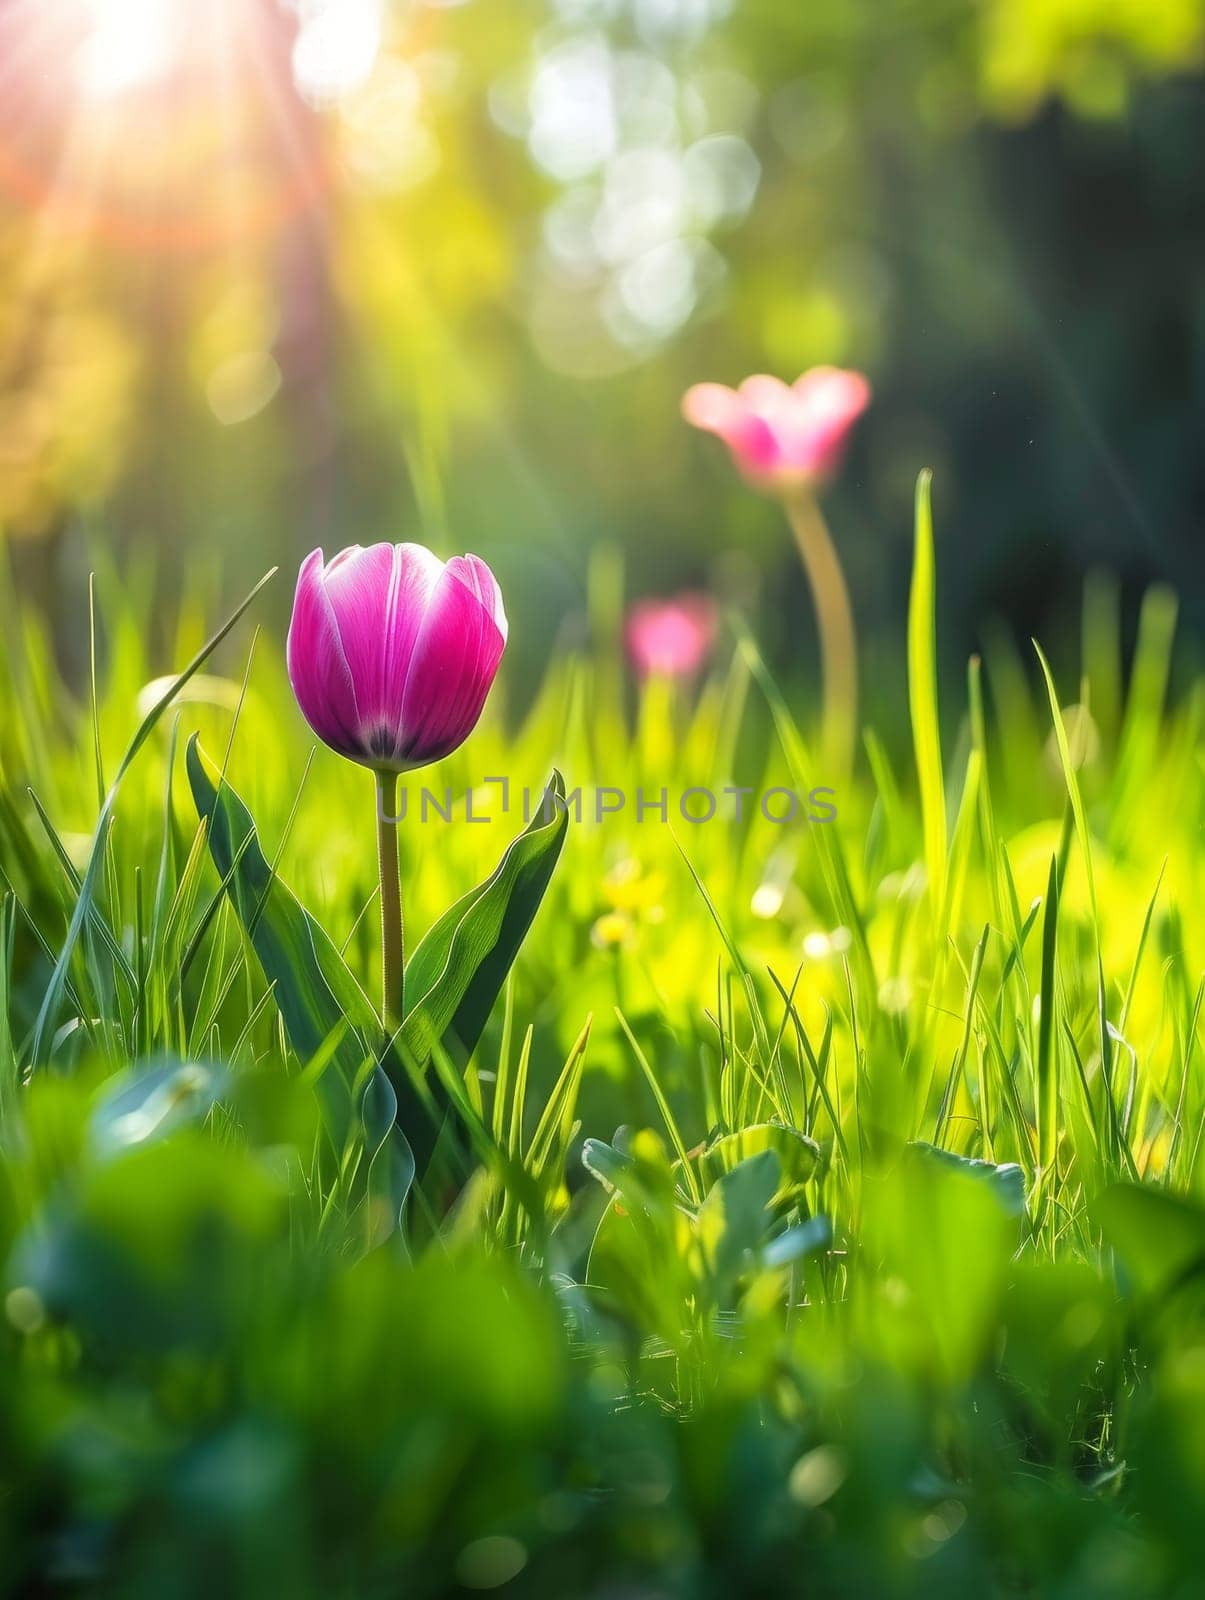 Radiant tulips rise from the green embrace of spring, serenaded by warm sunlight and the promise of new beginnings by sfinks